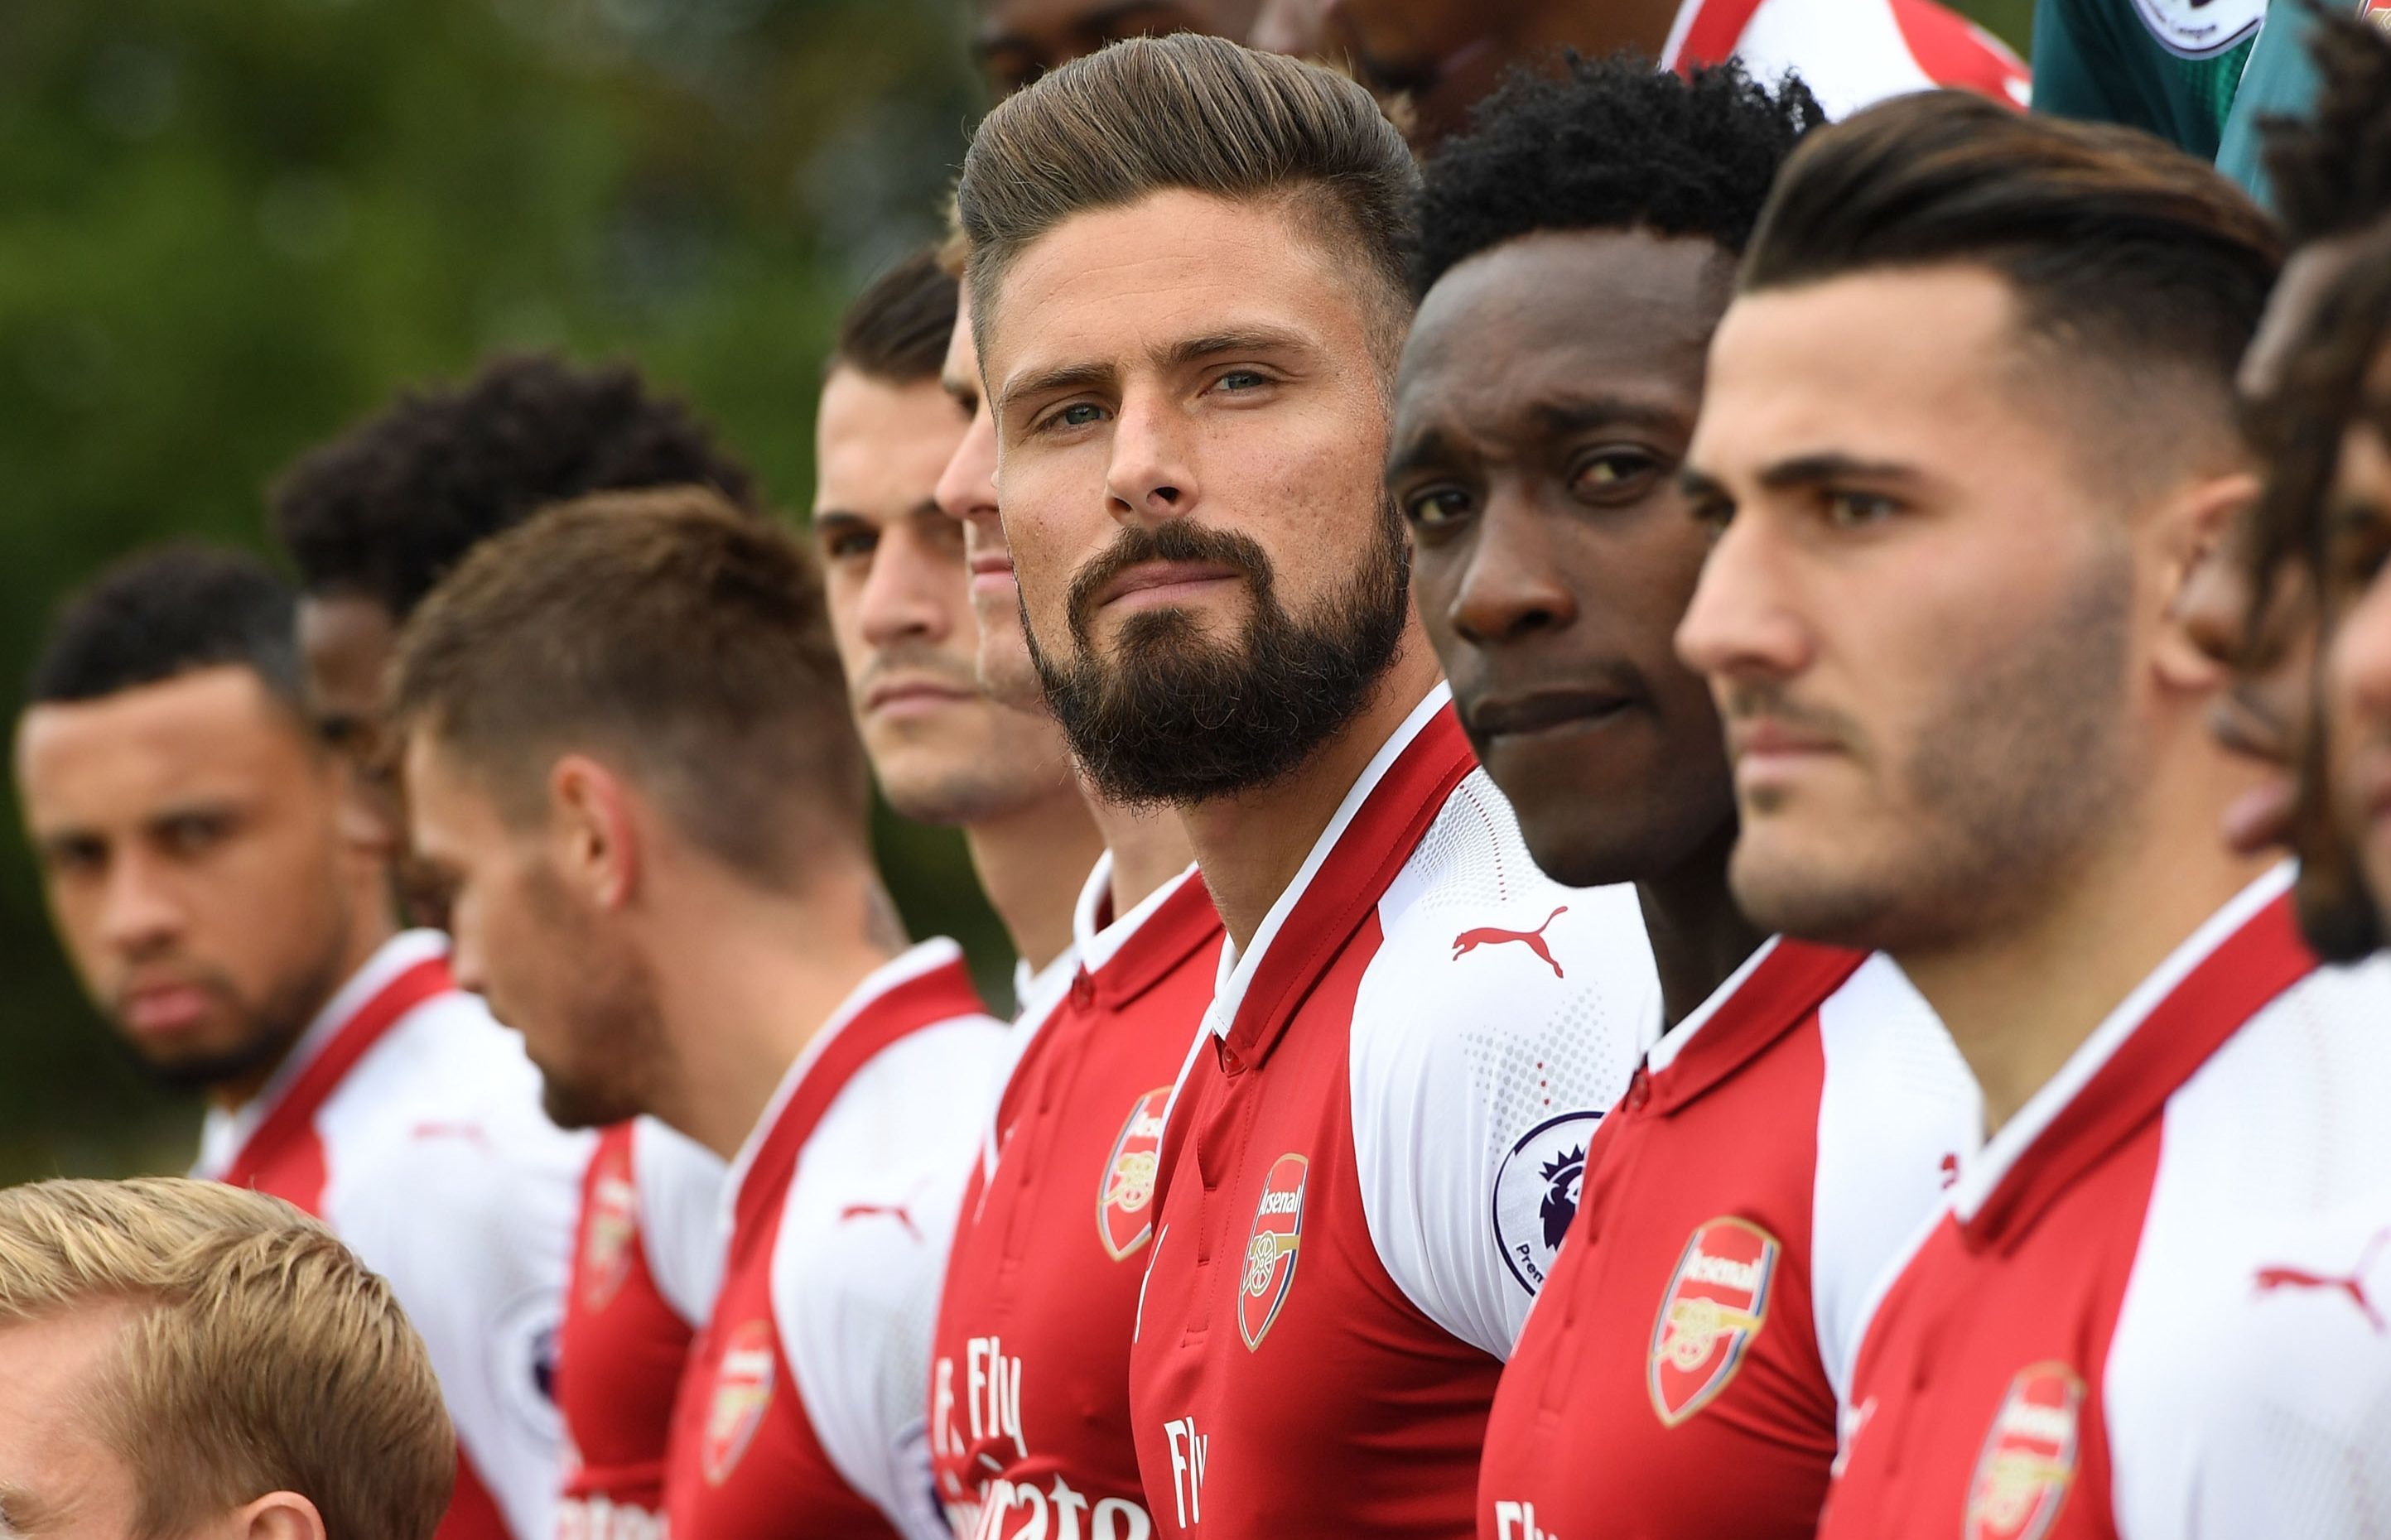 Olivier Giroud of Arsenal during the team photo (David Price/Arsenal FC via Getty Images)